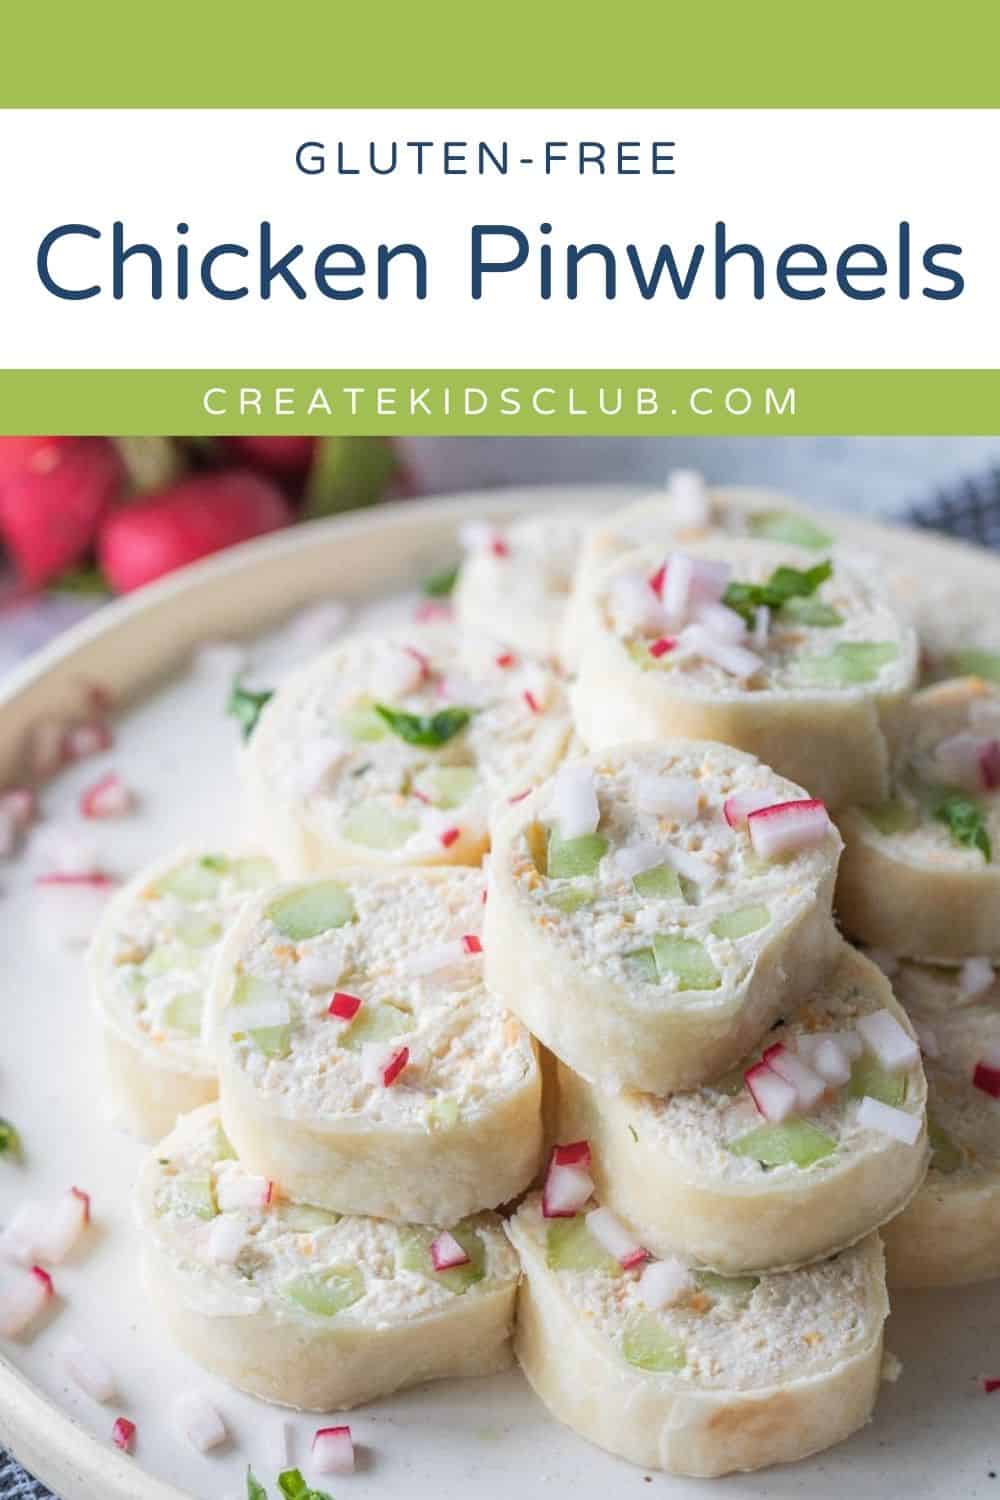 pin of chicken pinwheels on a plate